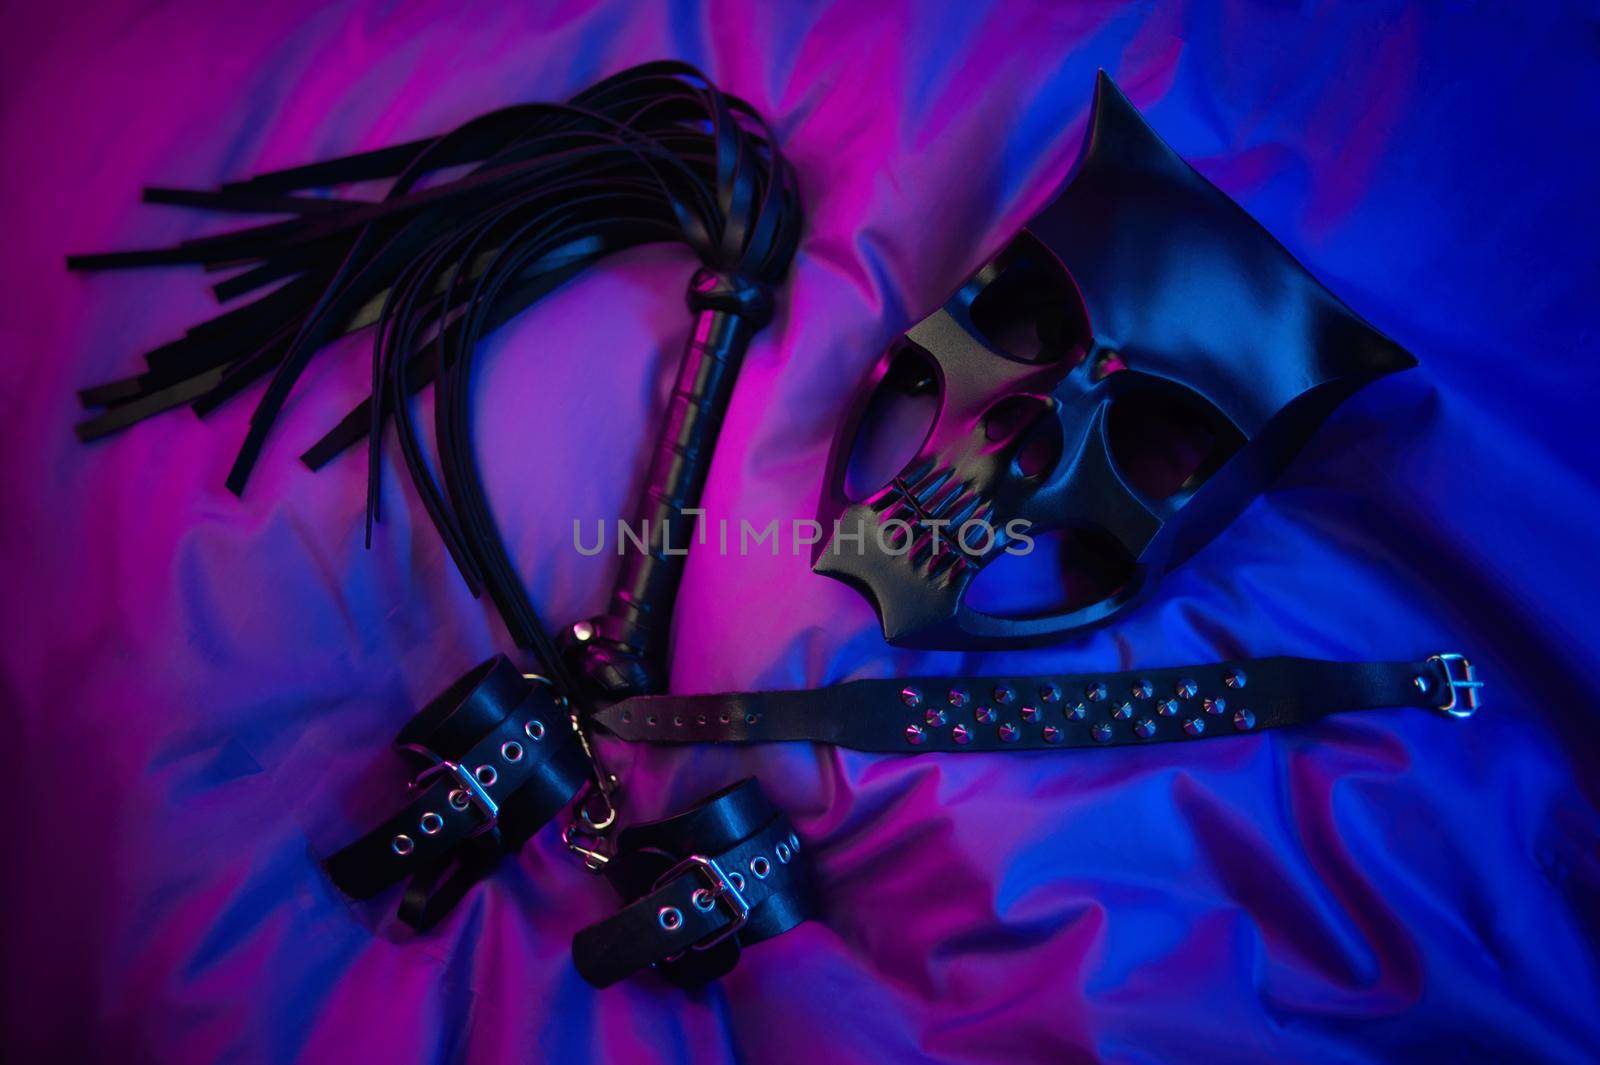 bdsm mask and leather accessories for bdsm games in neon light by Rotozey